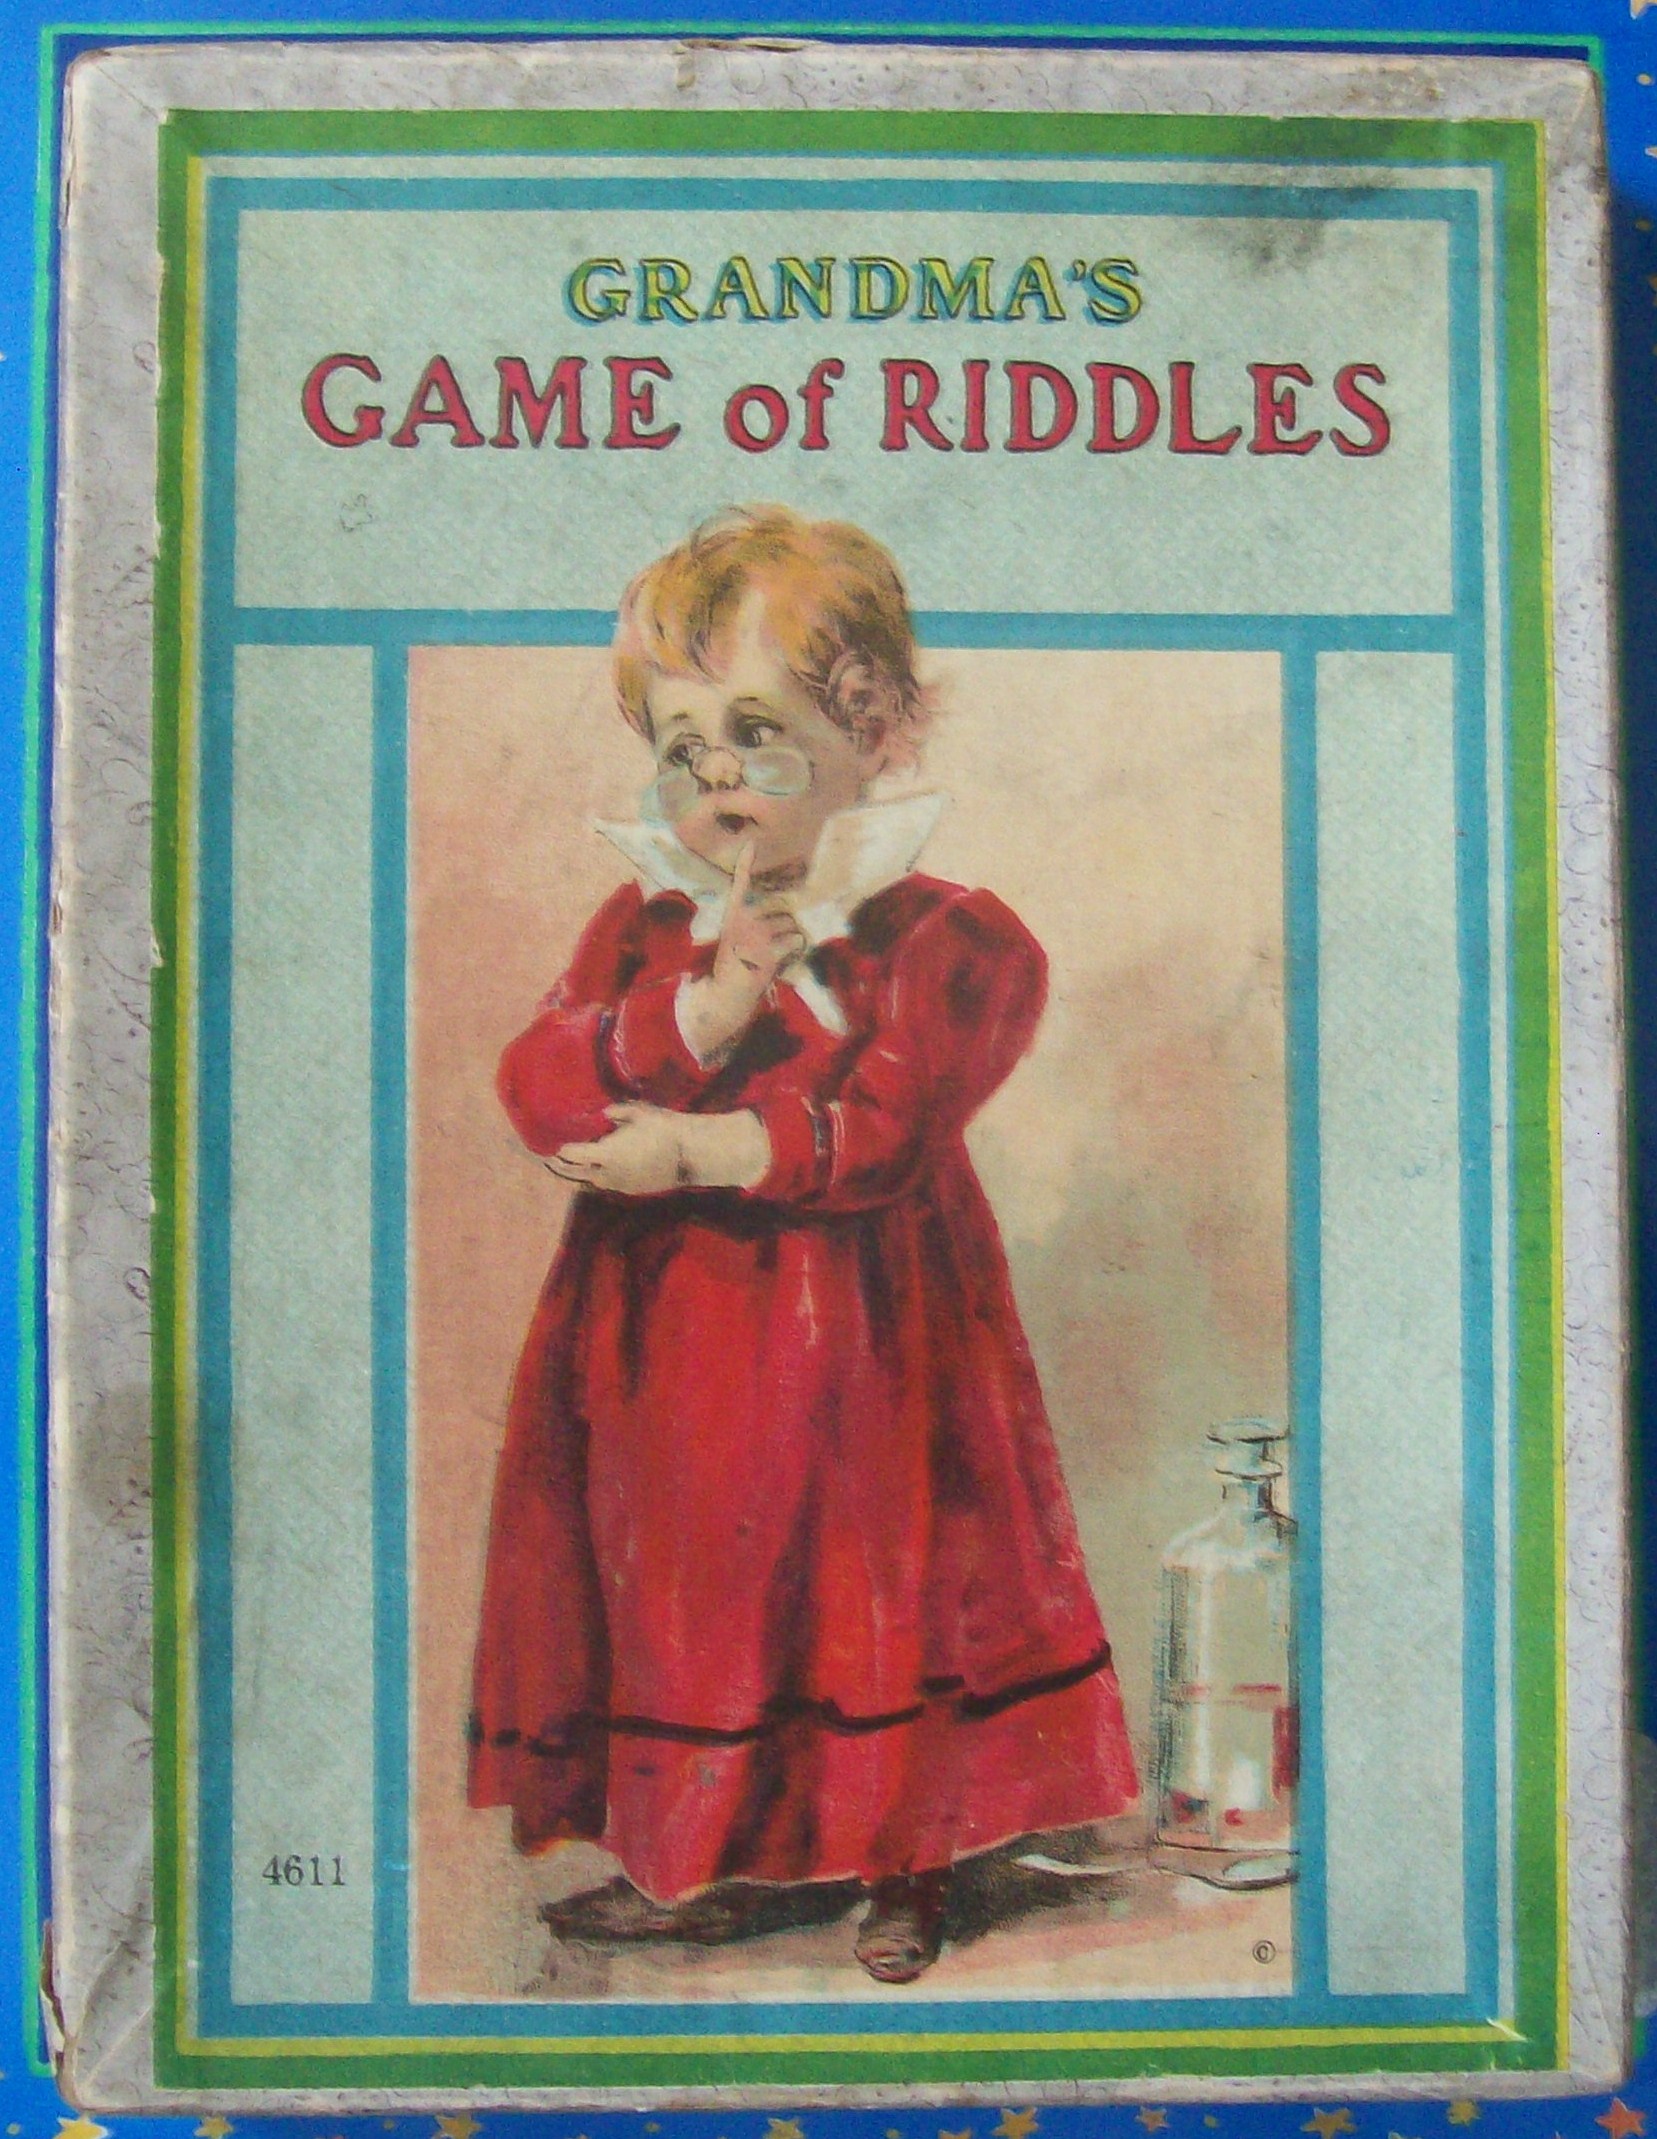 Old Game: The 1910 Grandma’s Game of Riddles by Milton Bradley